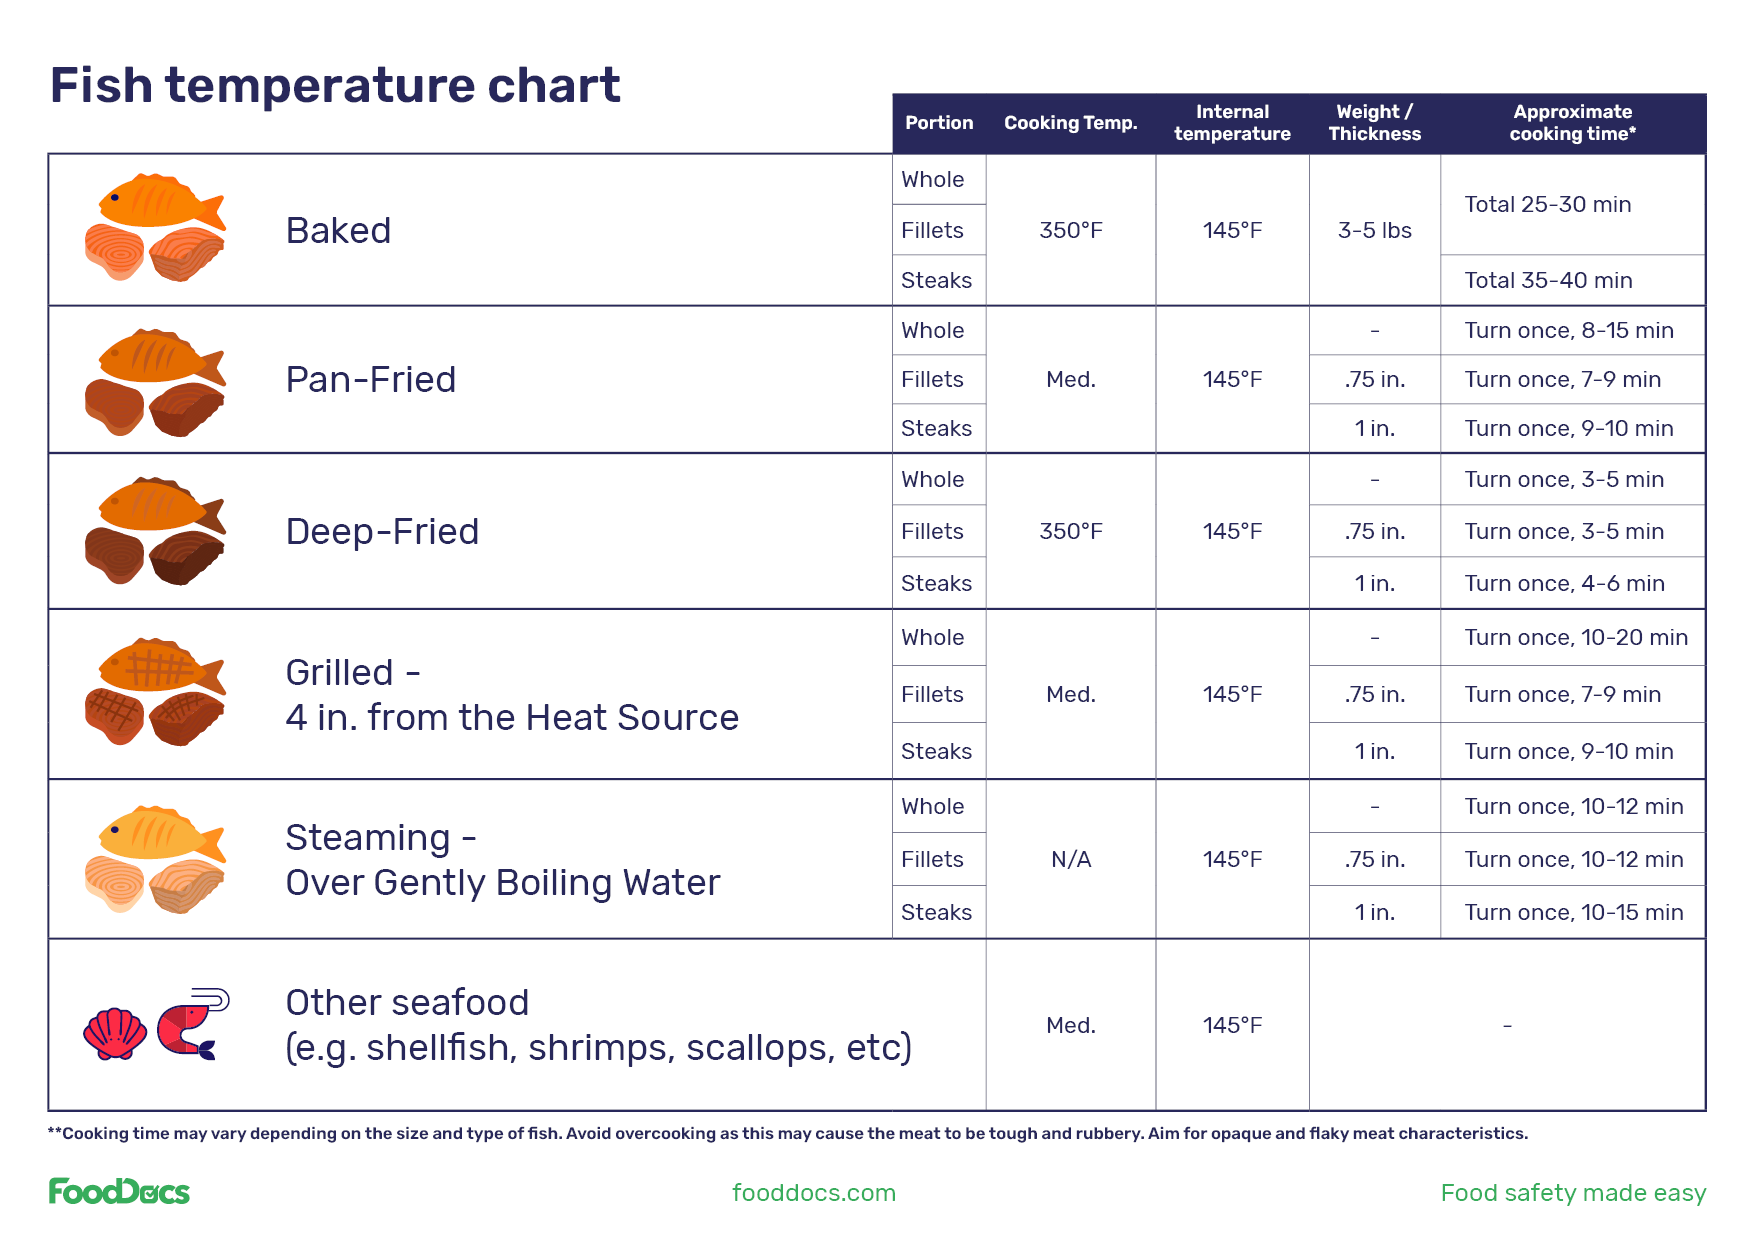 Internal Cooking Temperatures  Cooking temperatures, Food safety